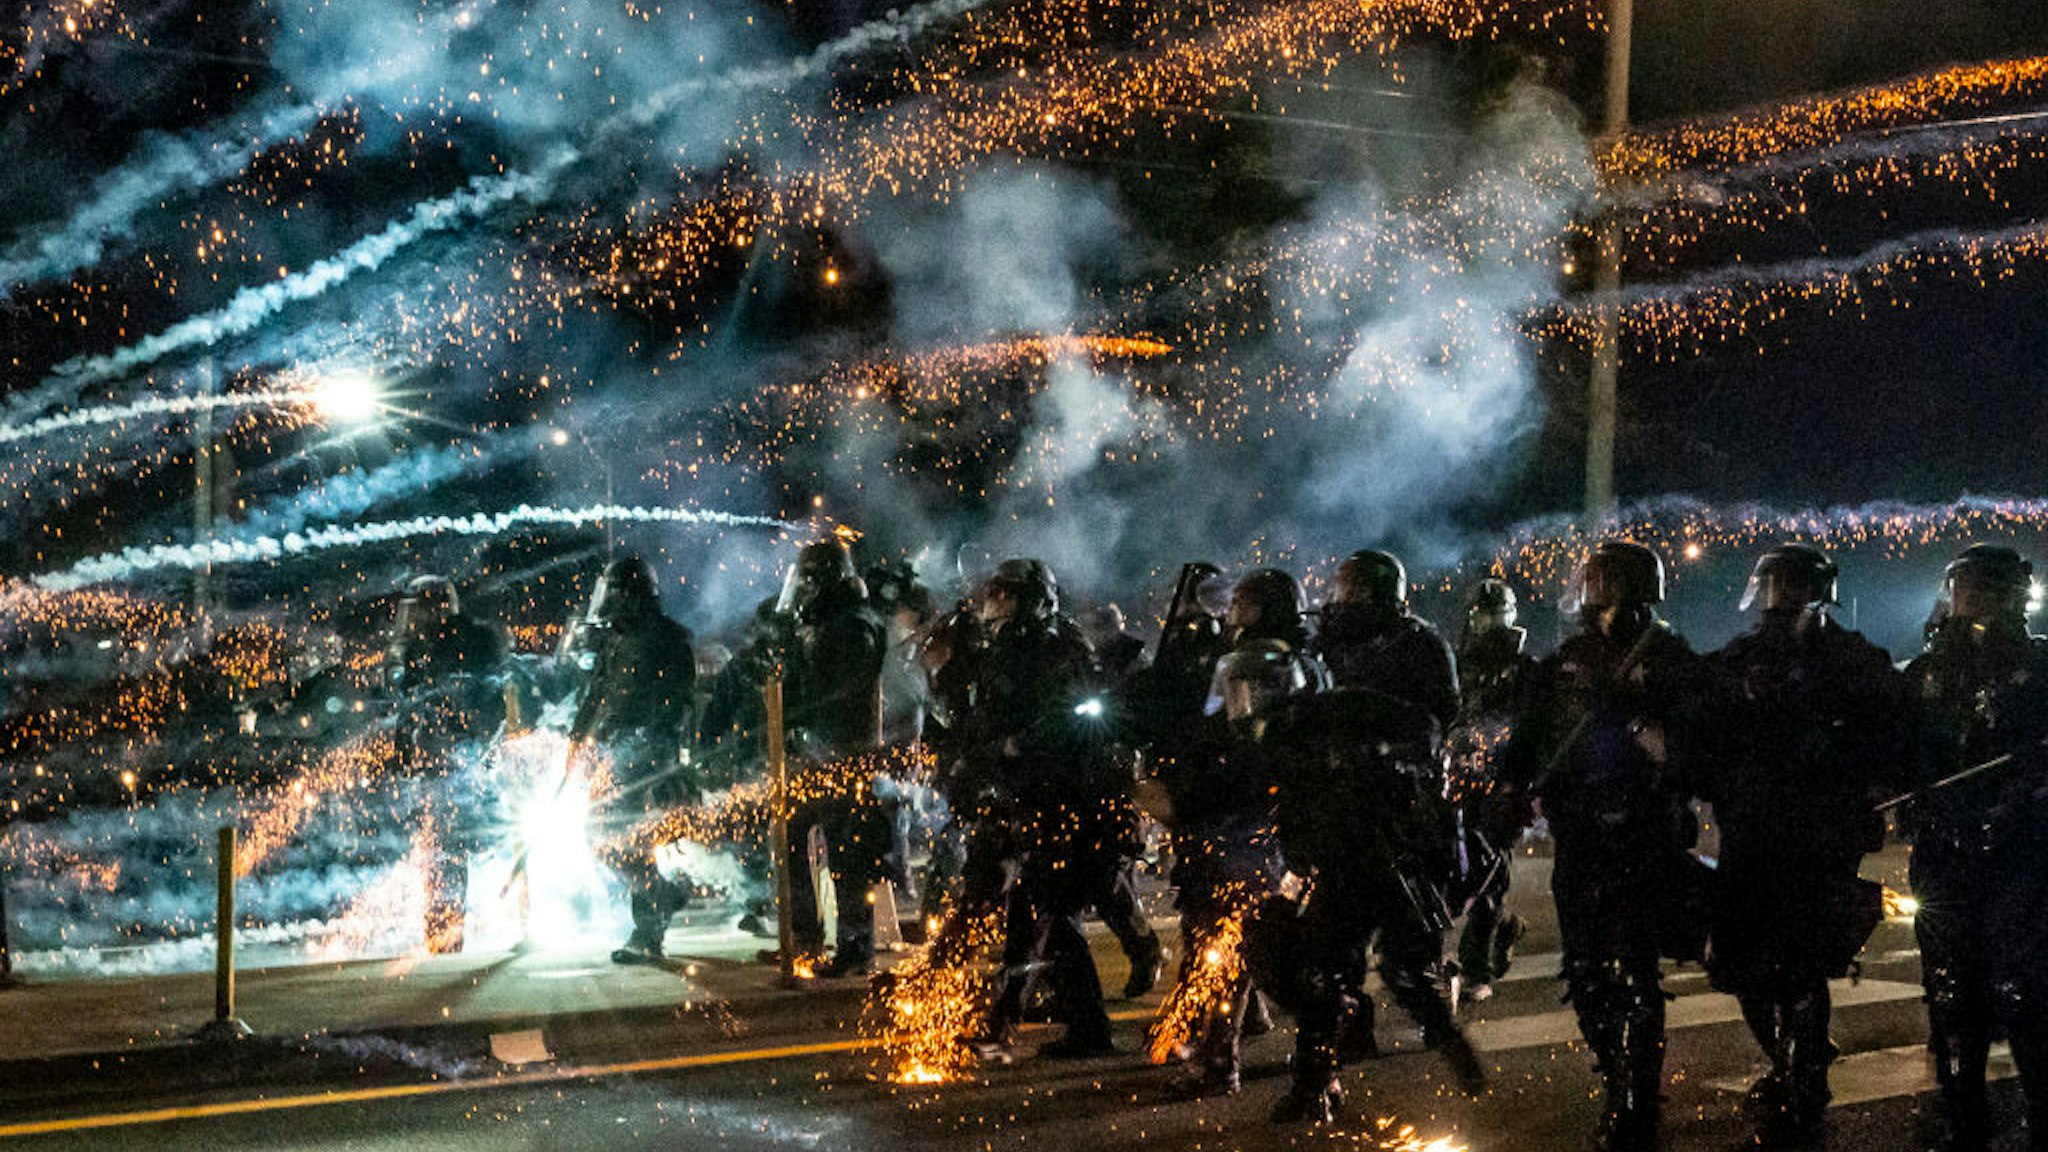 PORTLAND, OREGON - SEPTEMBER 5: Oregon State Troopers and Portland police advance through tear gas and fire works while dispersing a protest against police brutality and racial injustice on September 5, 2020 in Portland, Oregon. Portland has seen nightly protests for the past 100 days following the death of George Floyd in police custody. (Photo by Nathan Howard/Getty Images)